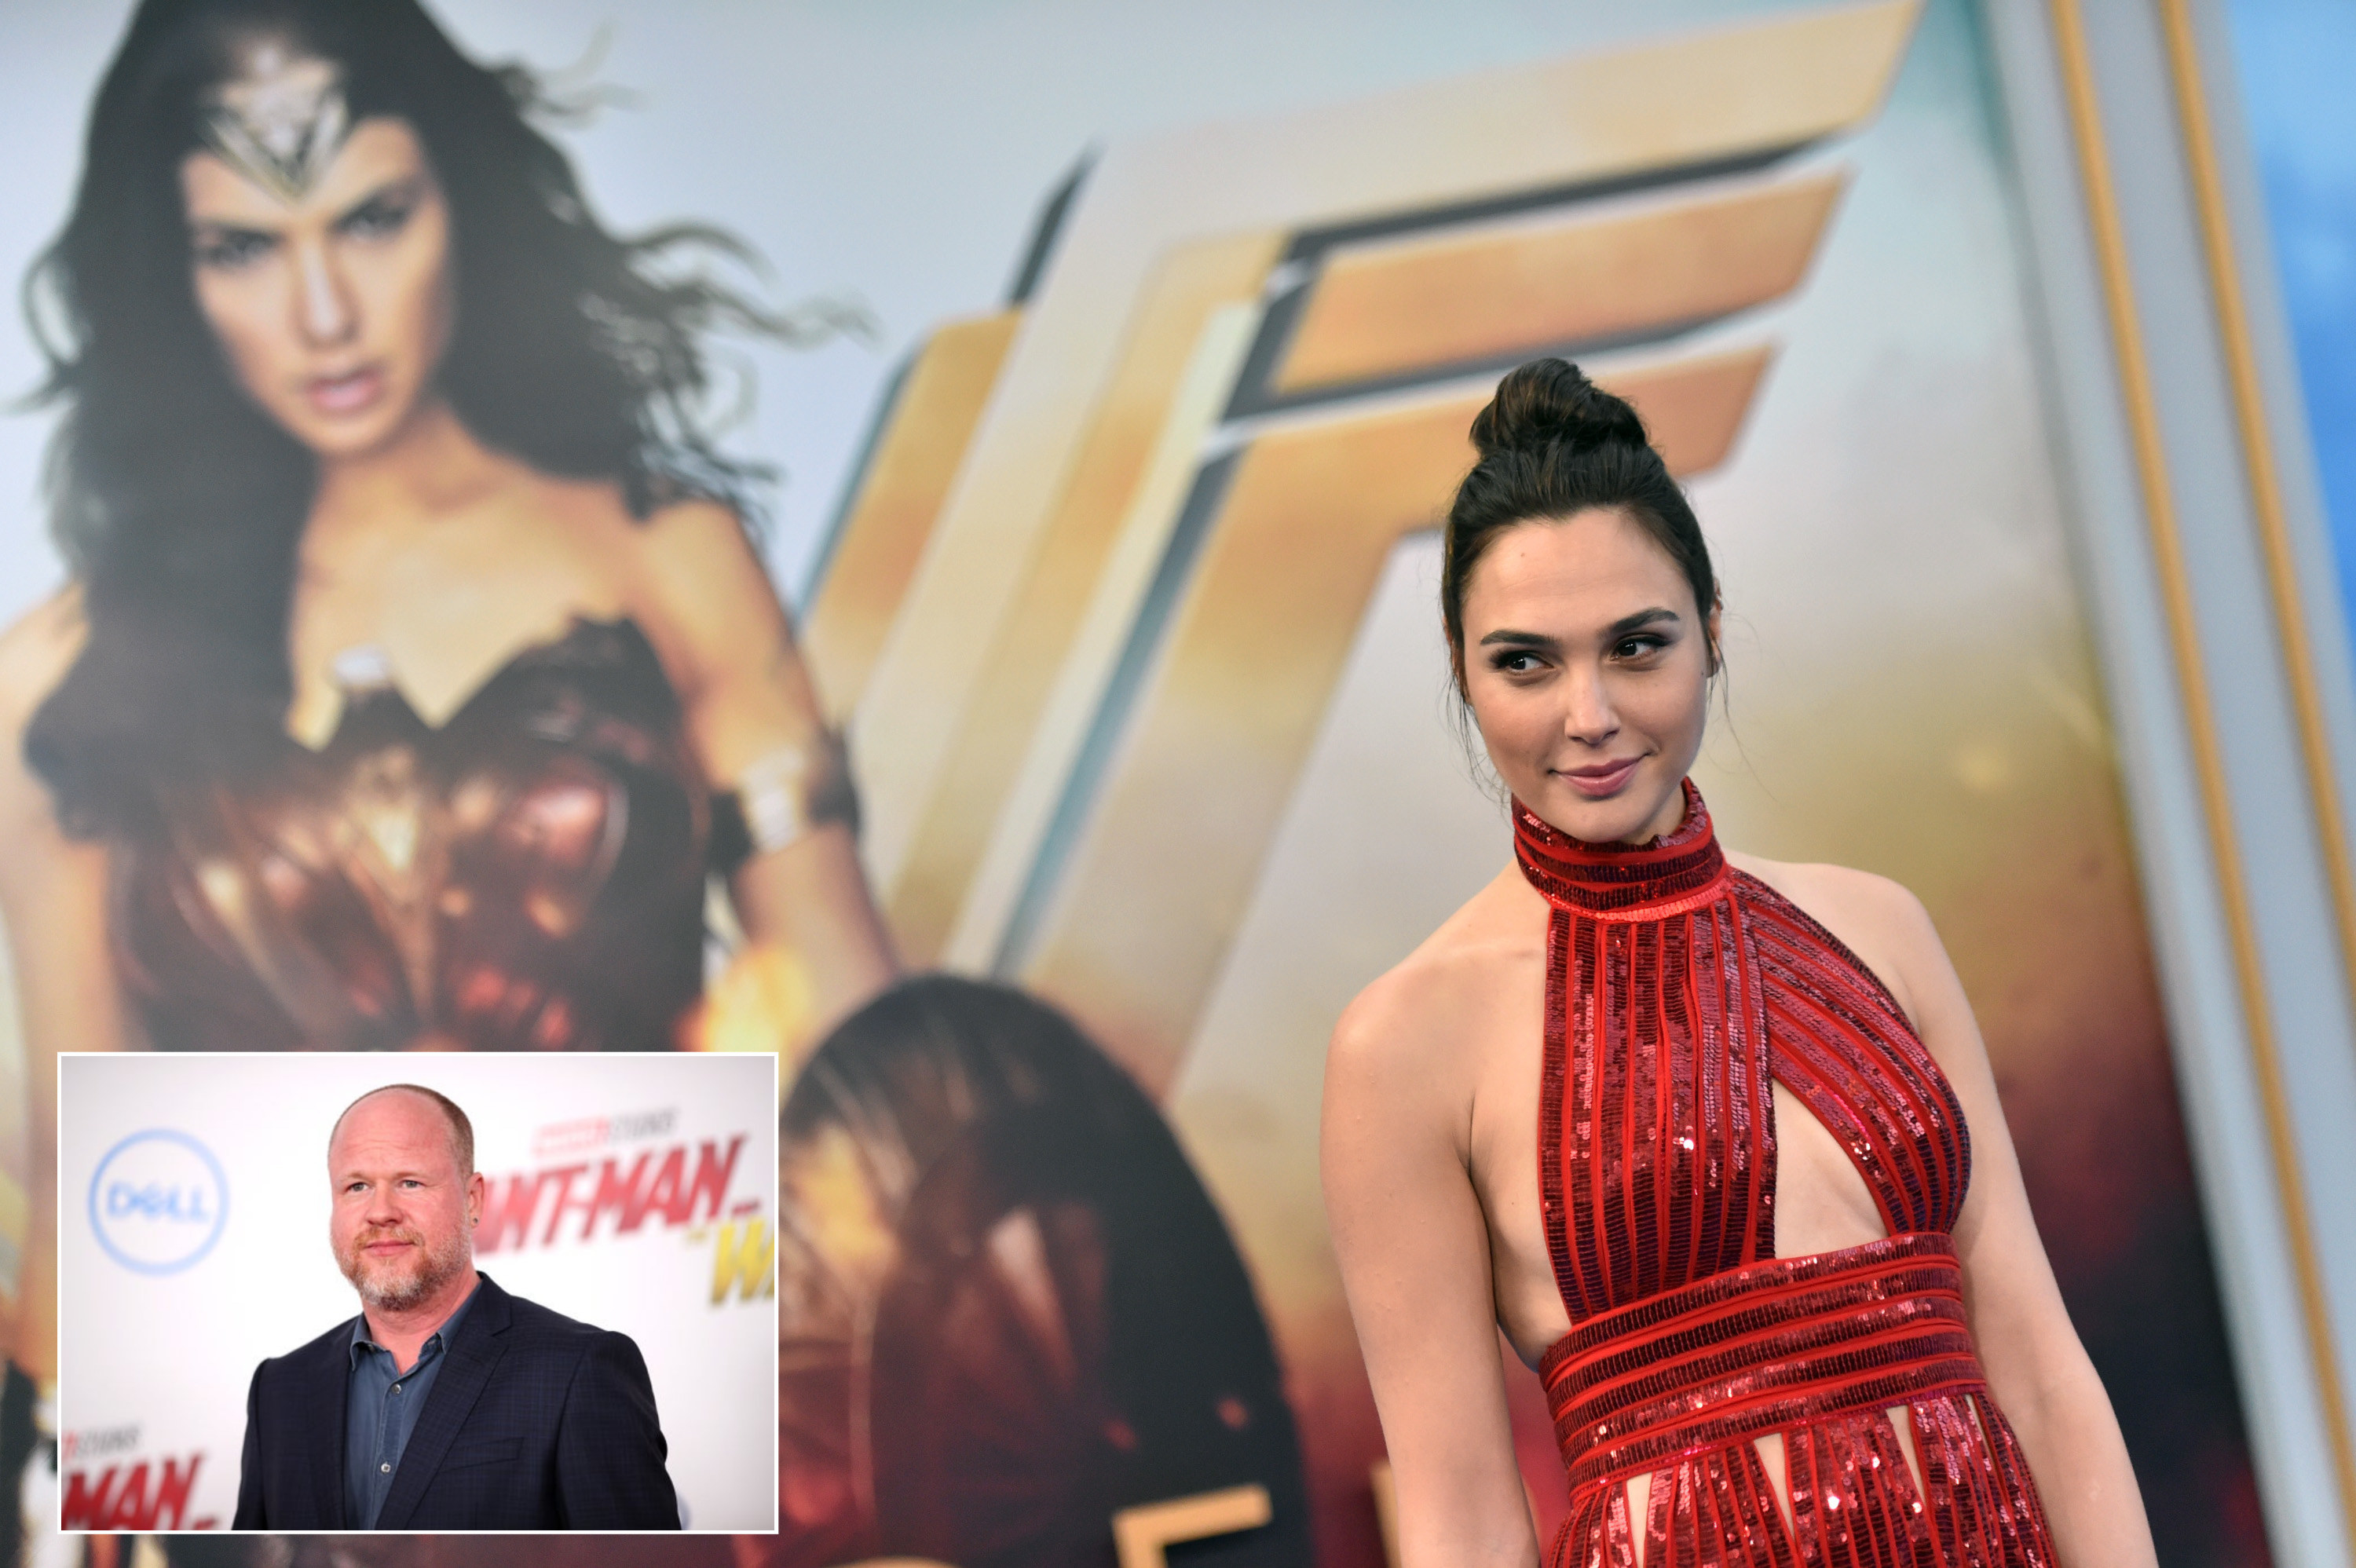 Actor Gal Gadot attends the premiere of &quot;Wonder Woman&quot; at the Pantages Theatre on May 25, 2017 in Hollywood and the other image shows Joss Whedon attend the premiere of Disney And Marvel&#x27;s &quot;Ant-Man And The Wasp&quot; on June 25, 2018 in LA